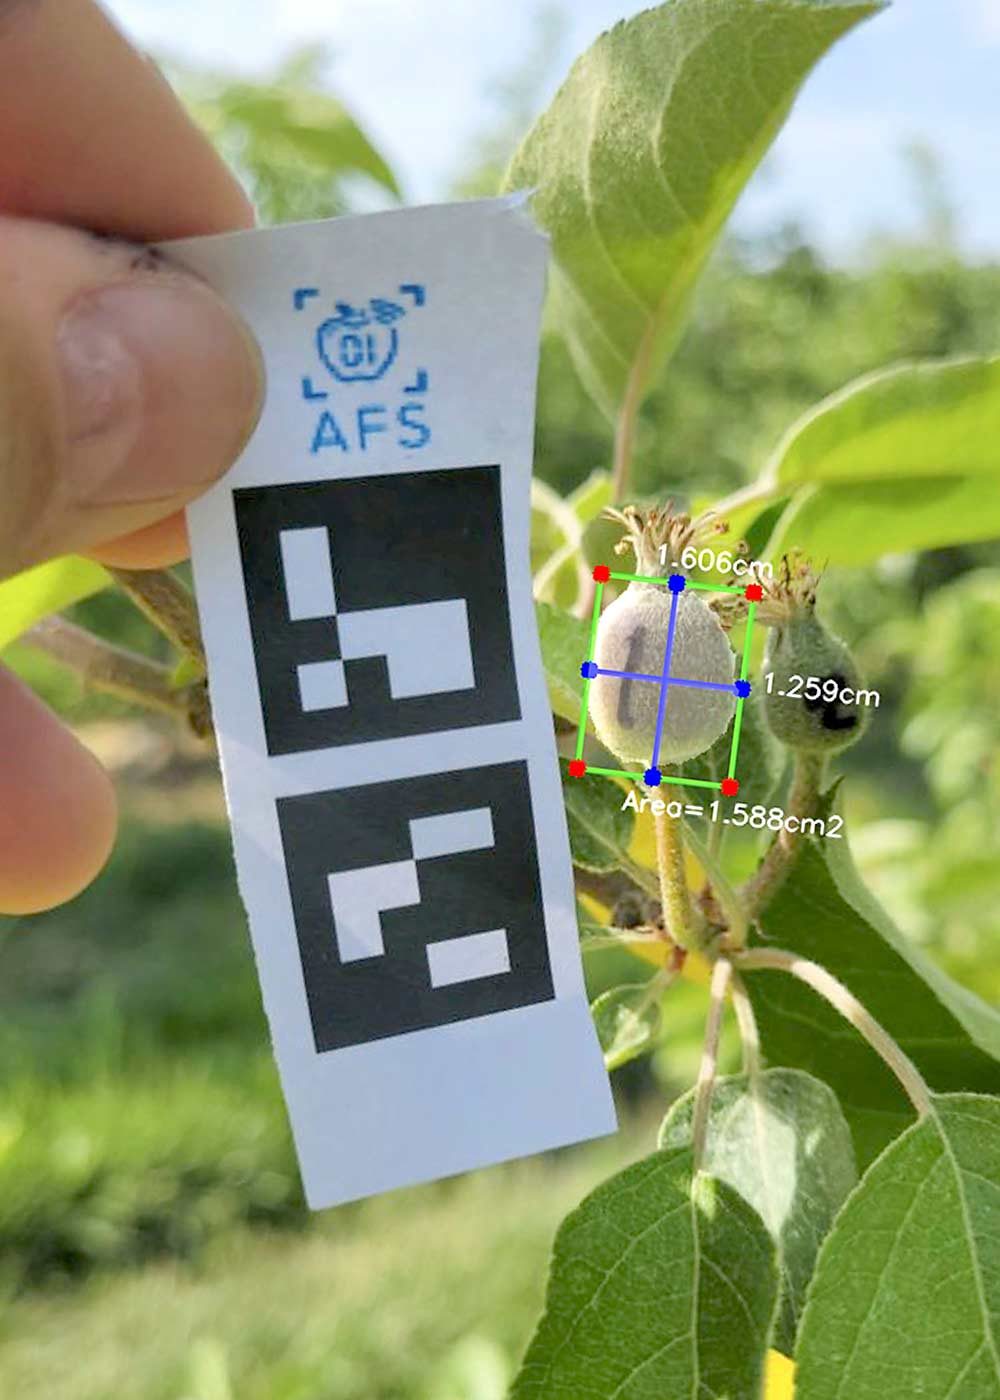 Take a picture like this and Automated Fruit Scouting’s technology will measure fruitlet size to assess fruitlet growth rate via repeated imaging. Similarly, photos of each trunk can be used to measure trunk cross-sectional area to guide optimum cropping level for each tree, according to company CEO Matt King. (Courtesy Automated Fruit Scouting)